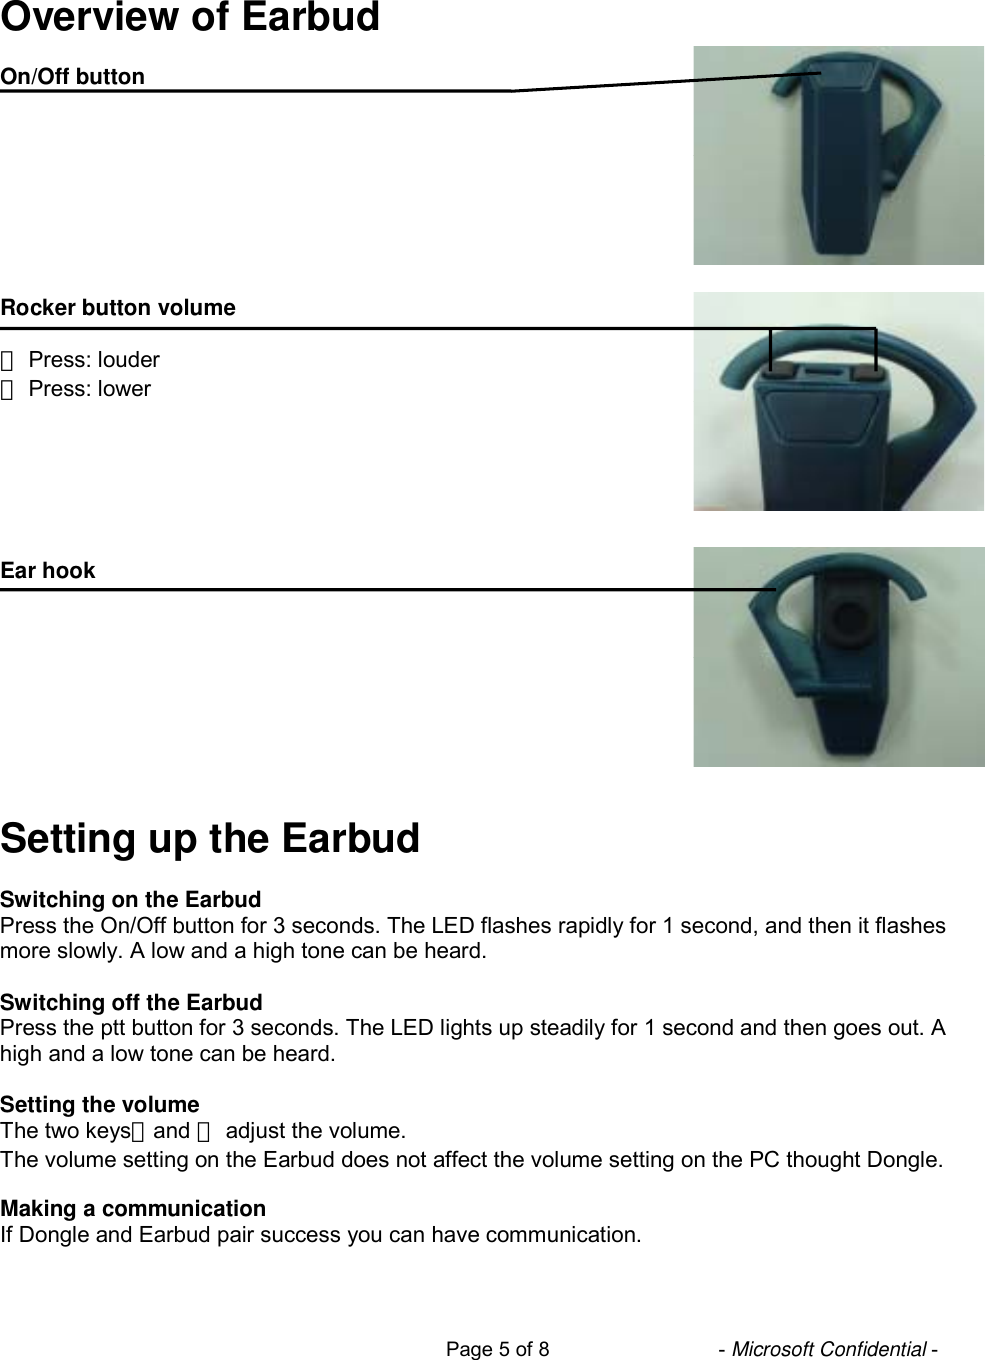                                                                           Page 5 of 8                              - Microsoft Confidential -   Overview of Earbud  On/Off button         Rocker button volume  ＋ Press: louder － Press: lower       Ear hook          Setting up the Earbud  Switching on the Earbud Press the On/Off button for 3 seconds. The LED flashes rapidly for 1 second, and then it flashes more slowly. A low and a high tone can be heard.  Switching off the Earbud Press the ptt button for 3 seconds. The LED lights up steadily for 1 second and then goes out. A high and a low tone can be heard.  Setting the volume The two keys＋and － adjust the volume. The volume setting on the Earbud does not affect the volume setting on the PC thought Dongle.  Making a communication If Dongle and Earbud pair success you can have communication.  